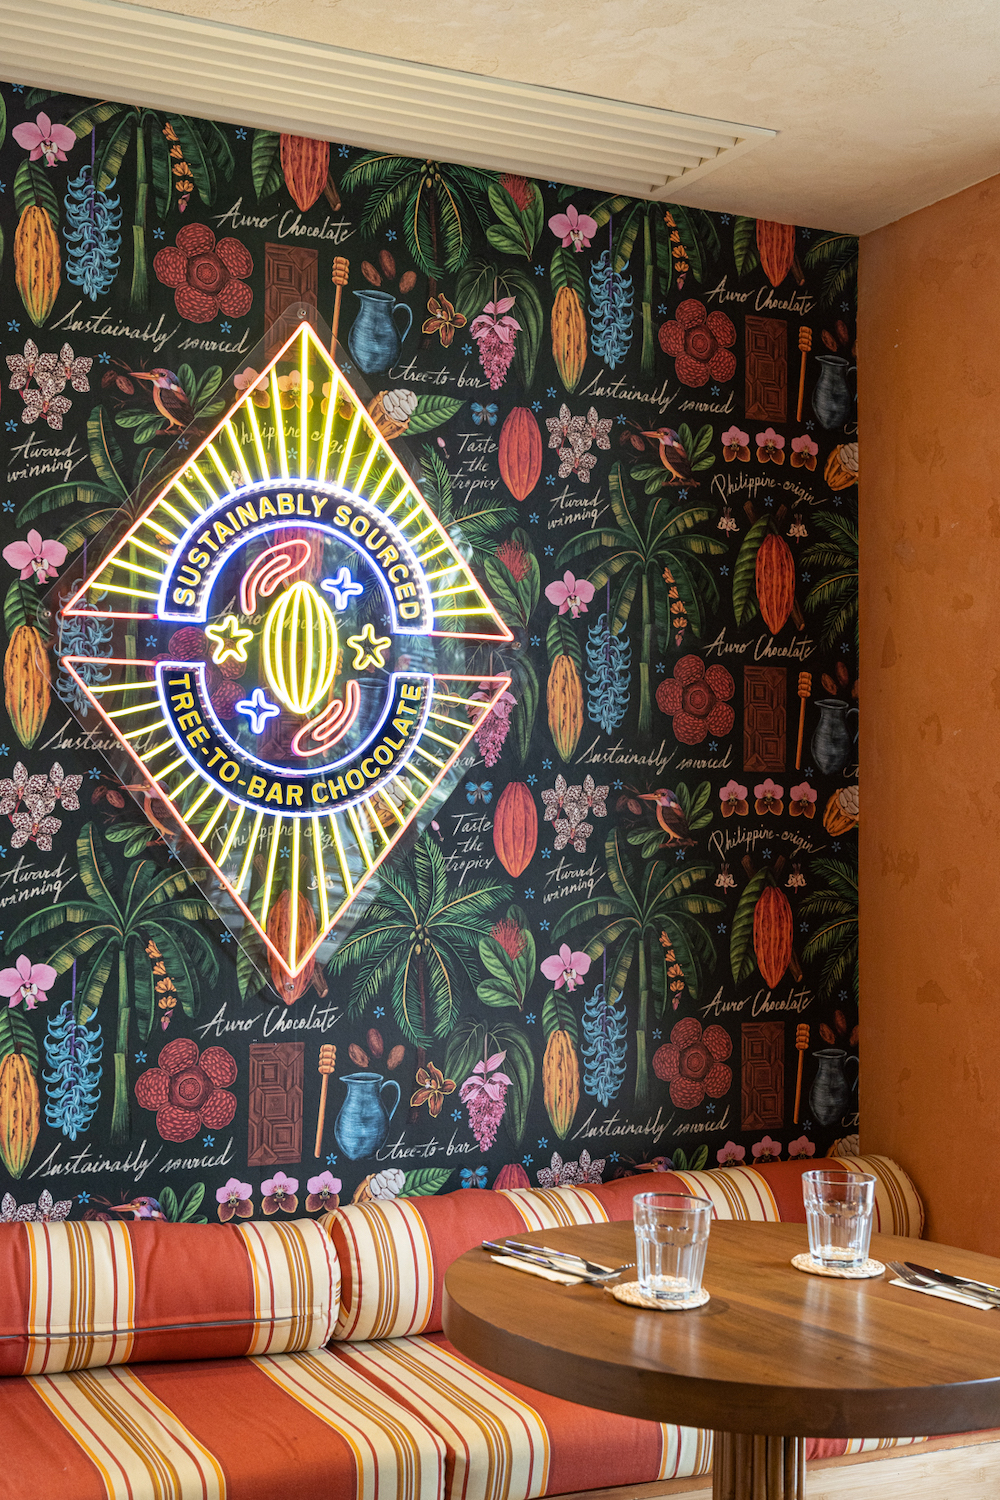 Bold prints, patterns, and colors dominate the entire Auro Chocolate Cafe